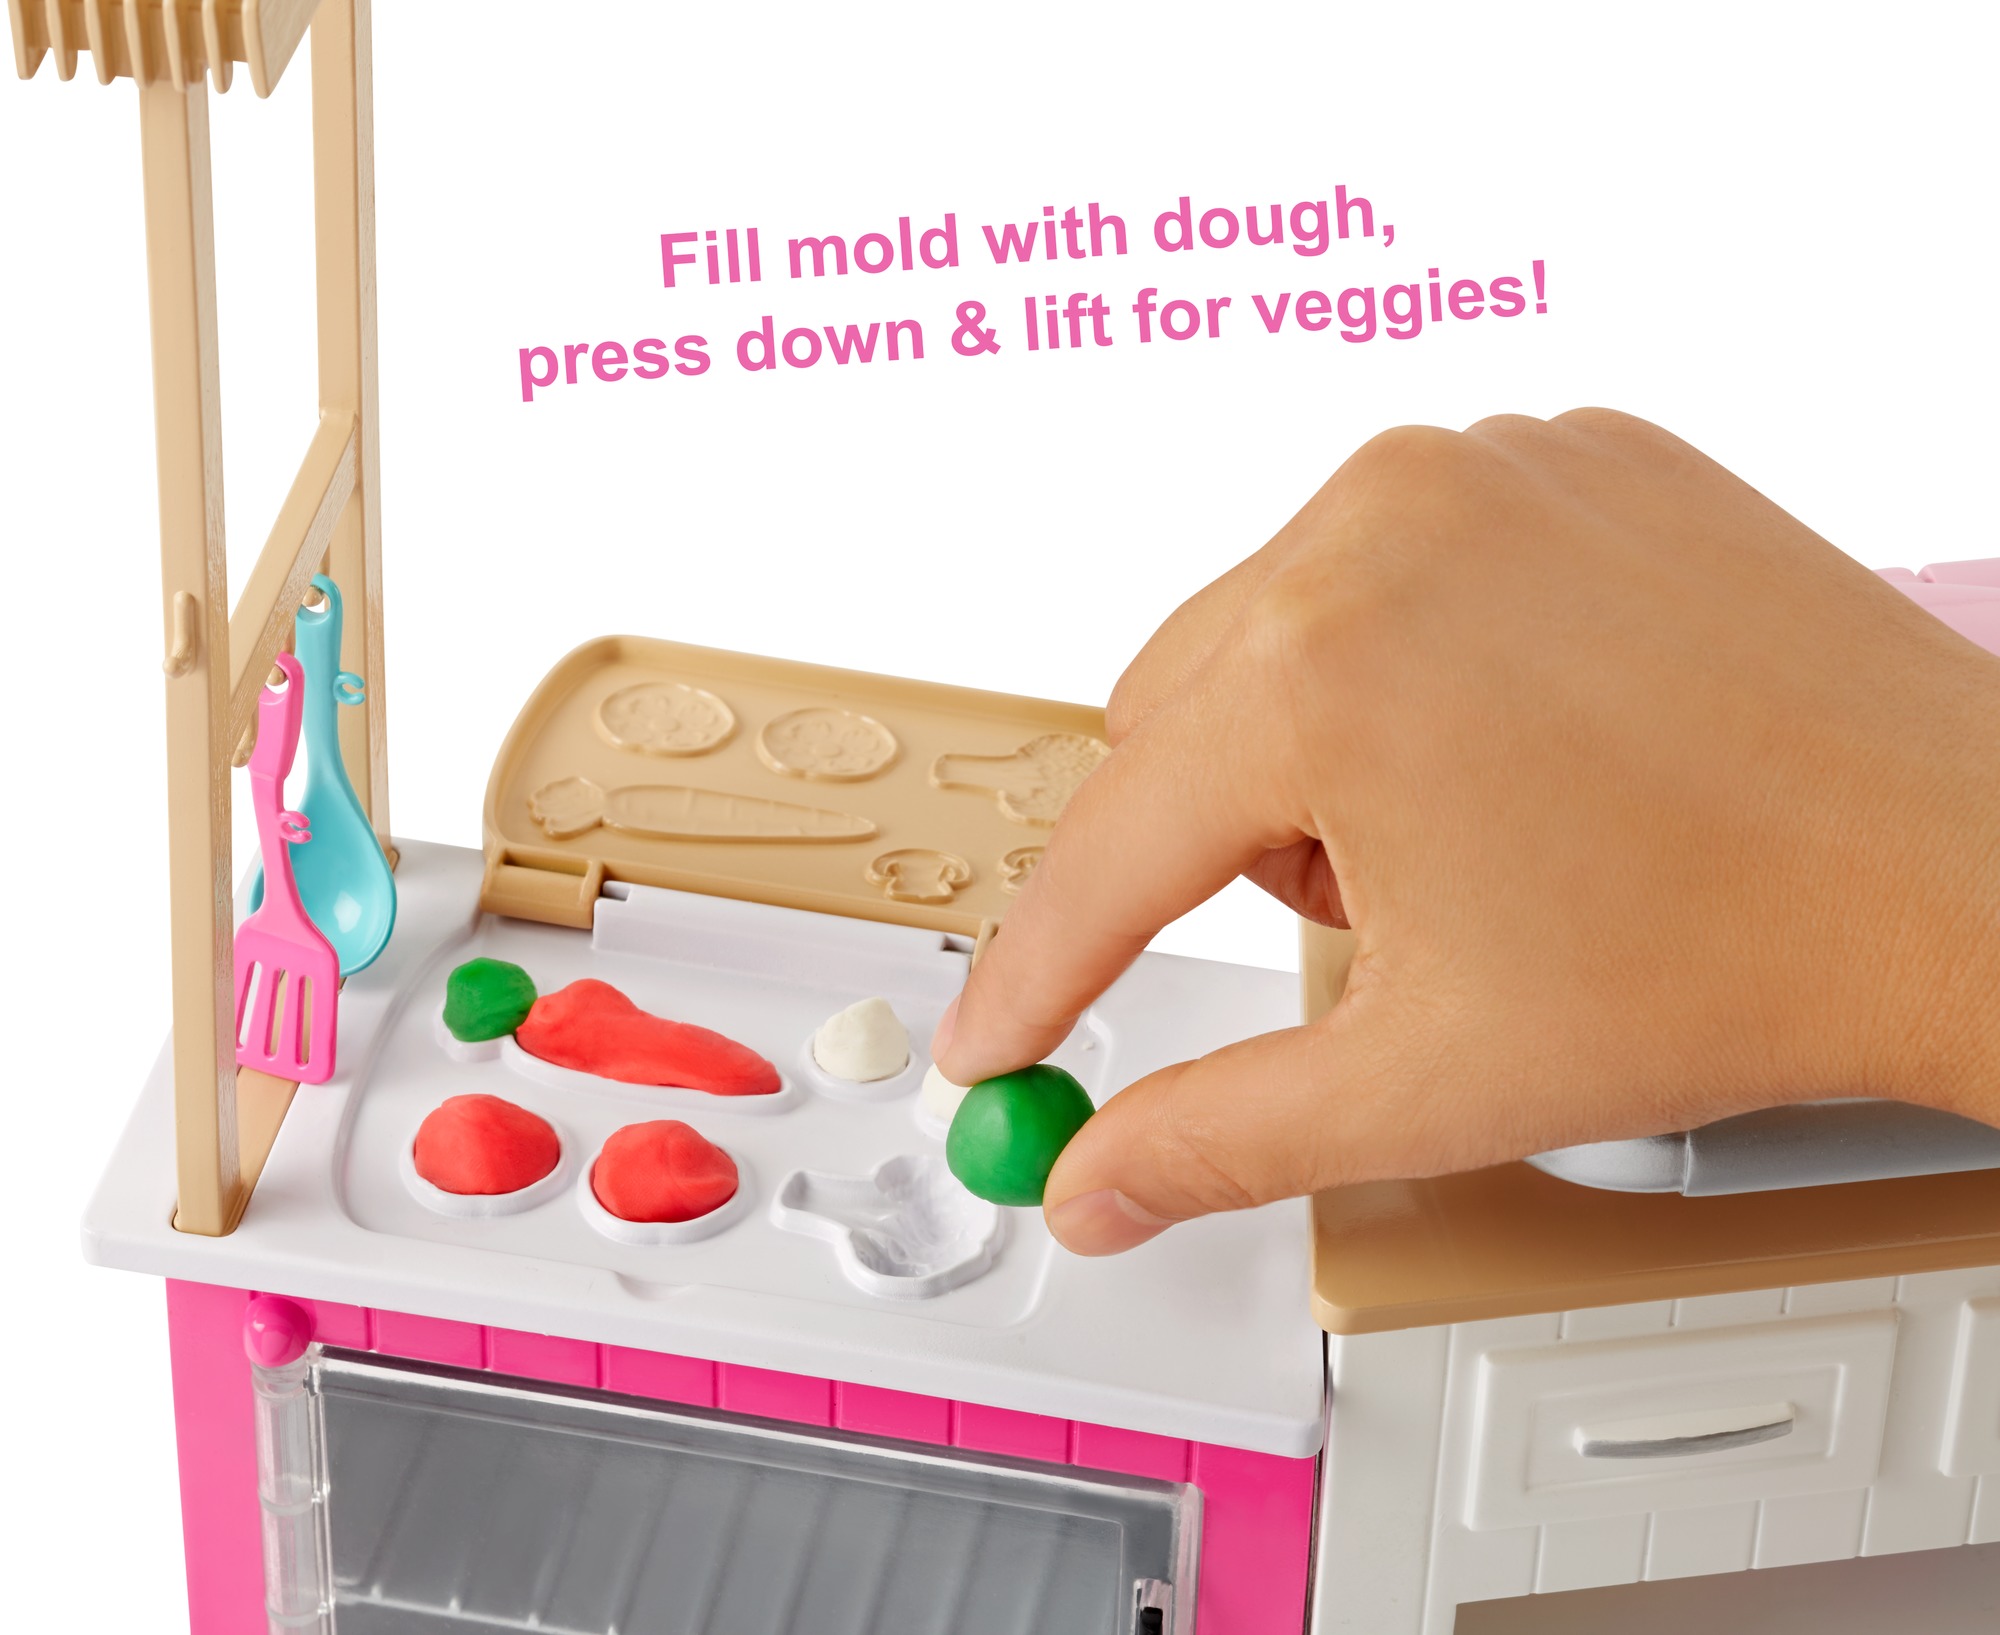 Barbie Ultimate Kitchen Cooking & Baking Playset with Chef Doll - image 5 of 8